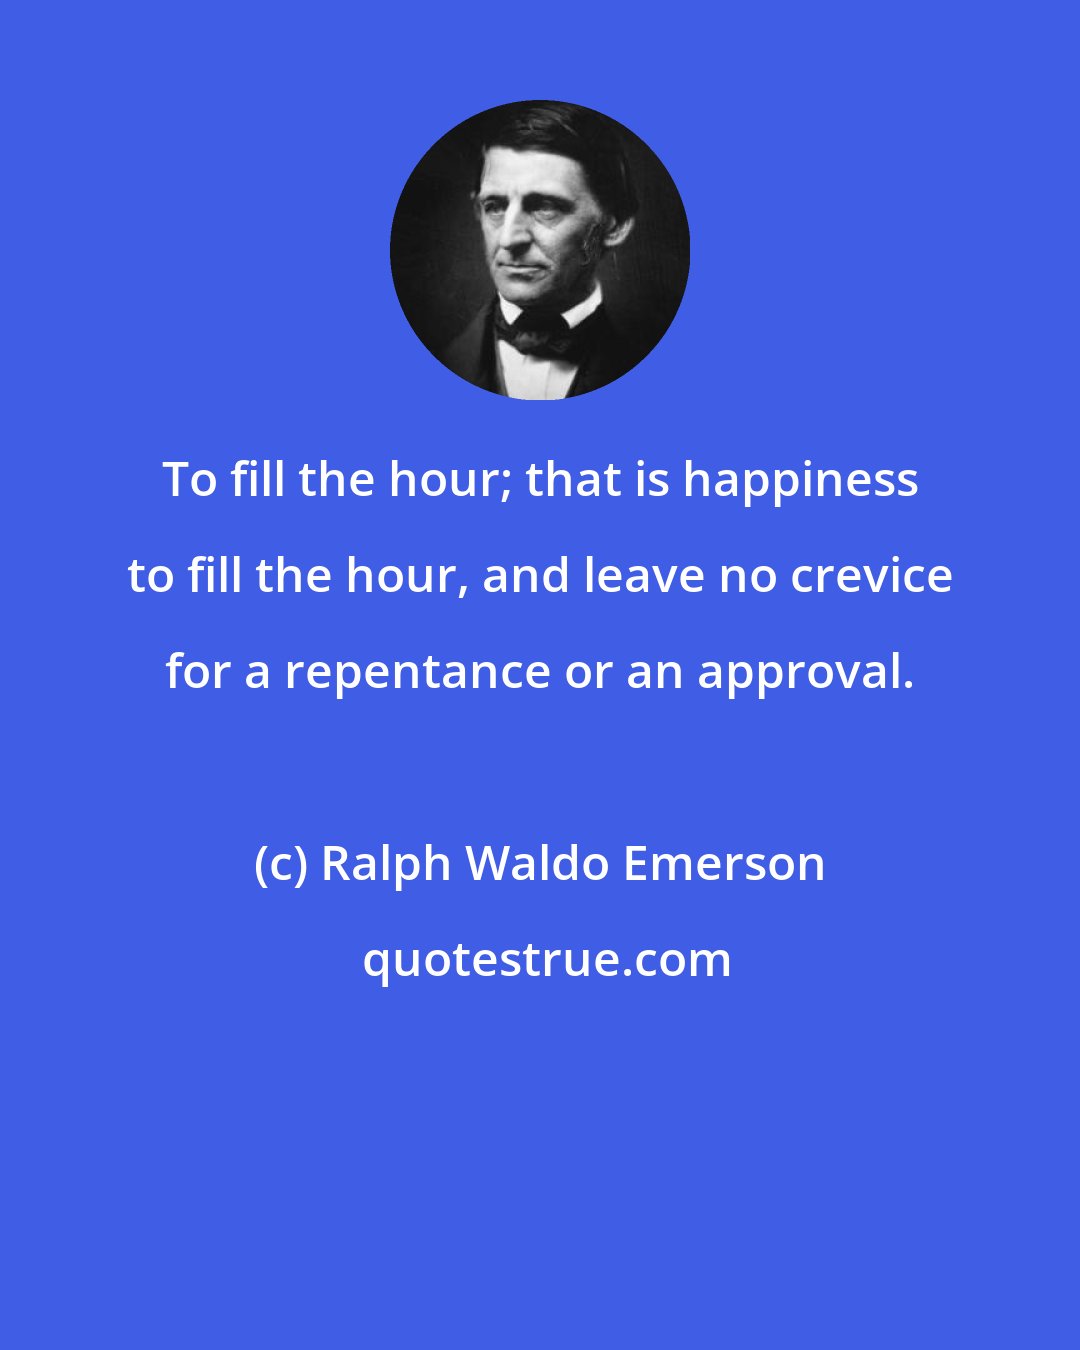 Ralph Waldo Emerson: To fill the hour; that is happiness to fill the hour, and leave no crevice for a repentance or an approval.